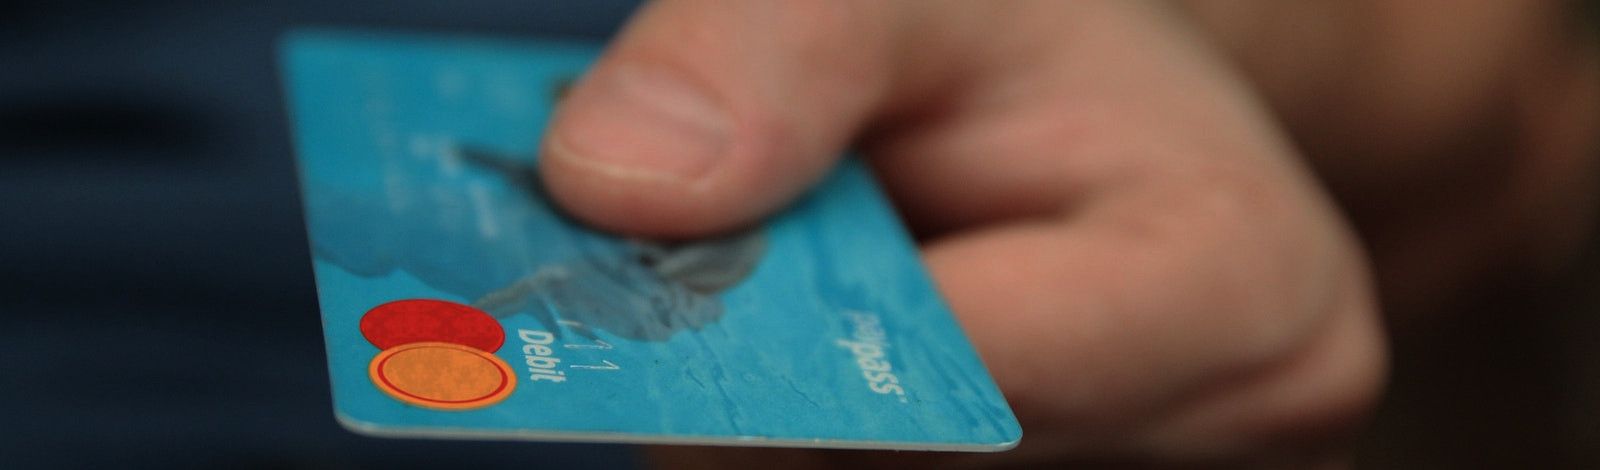 Closeup photo of a man's hand holding a light blue debit card with the MasterCard symbol on it.